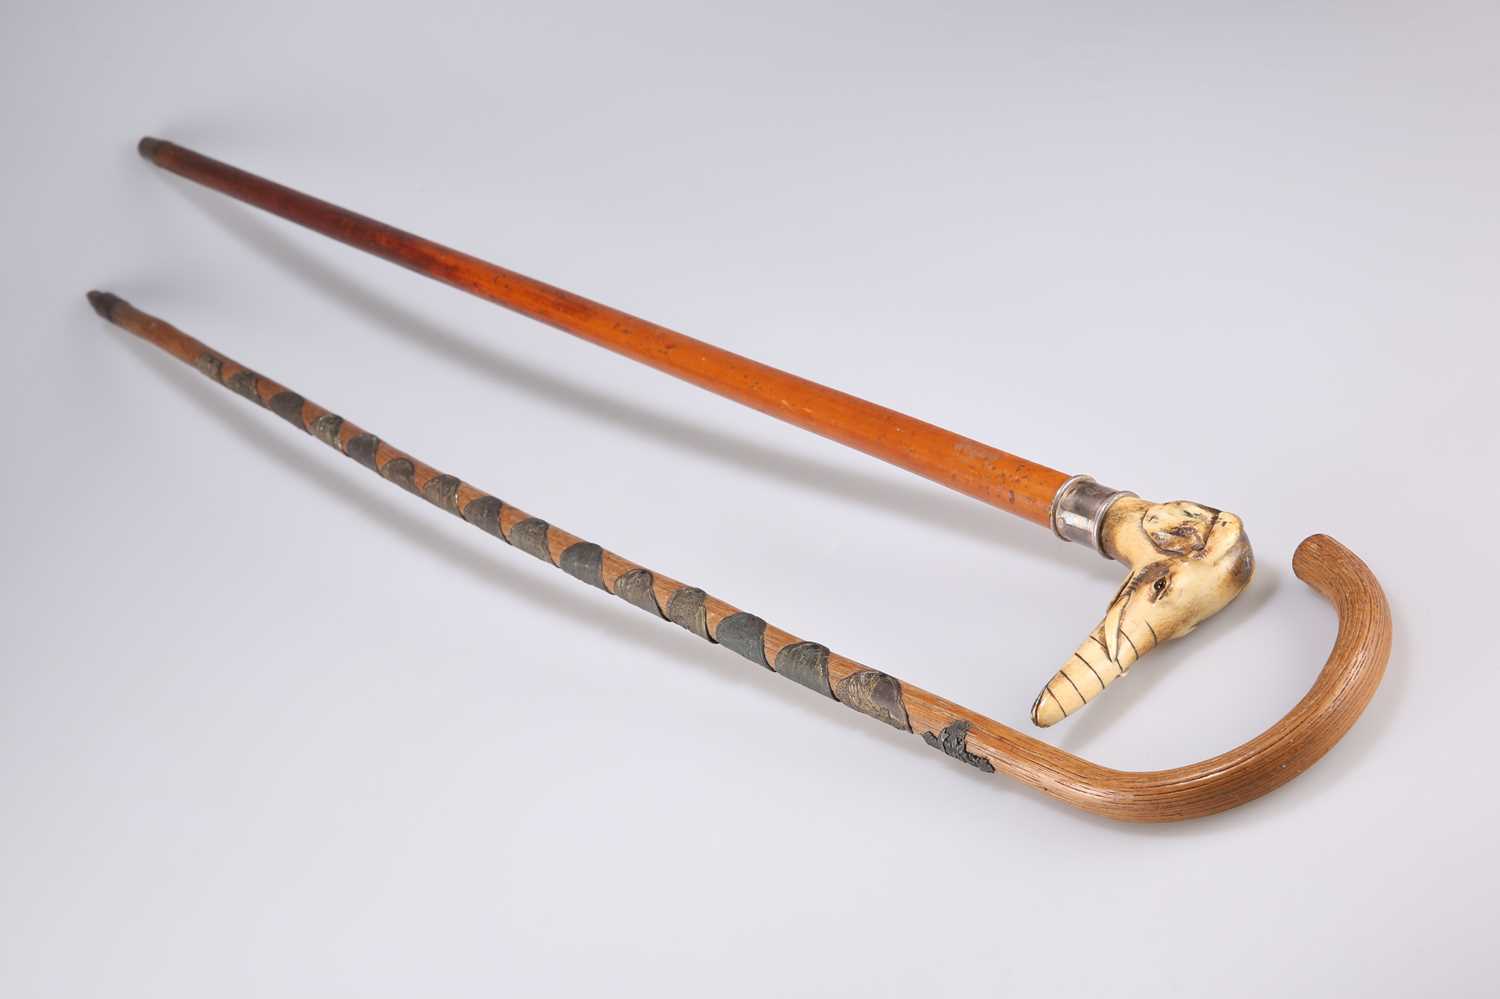 A SILVER-COLLARED AND HORN-HANDLED CANE